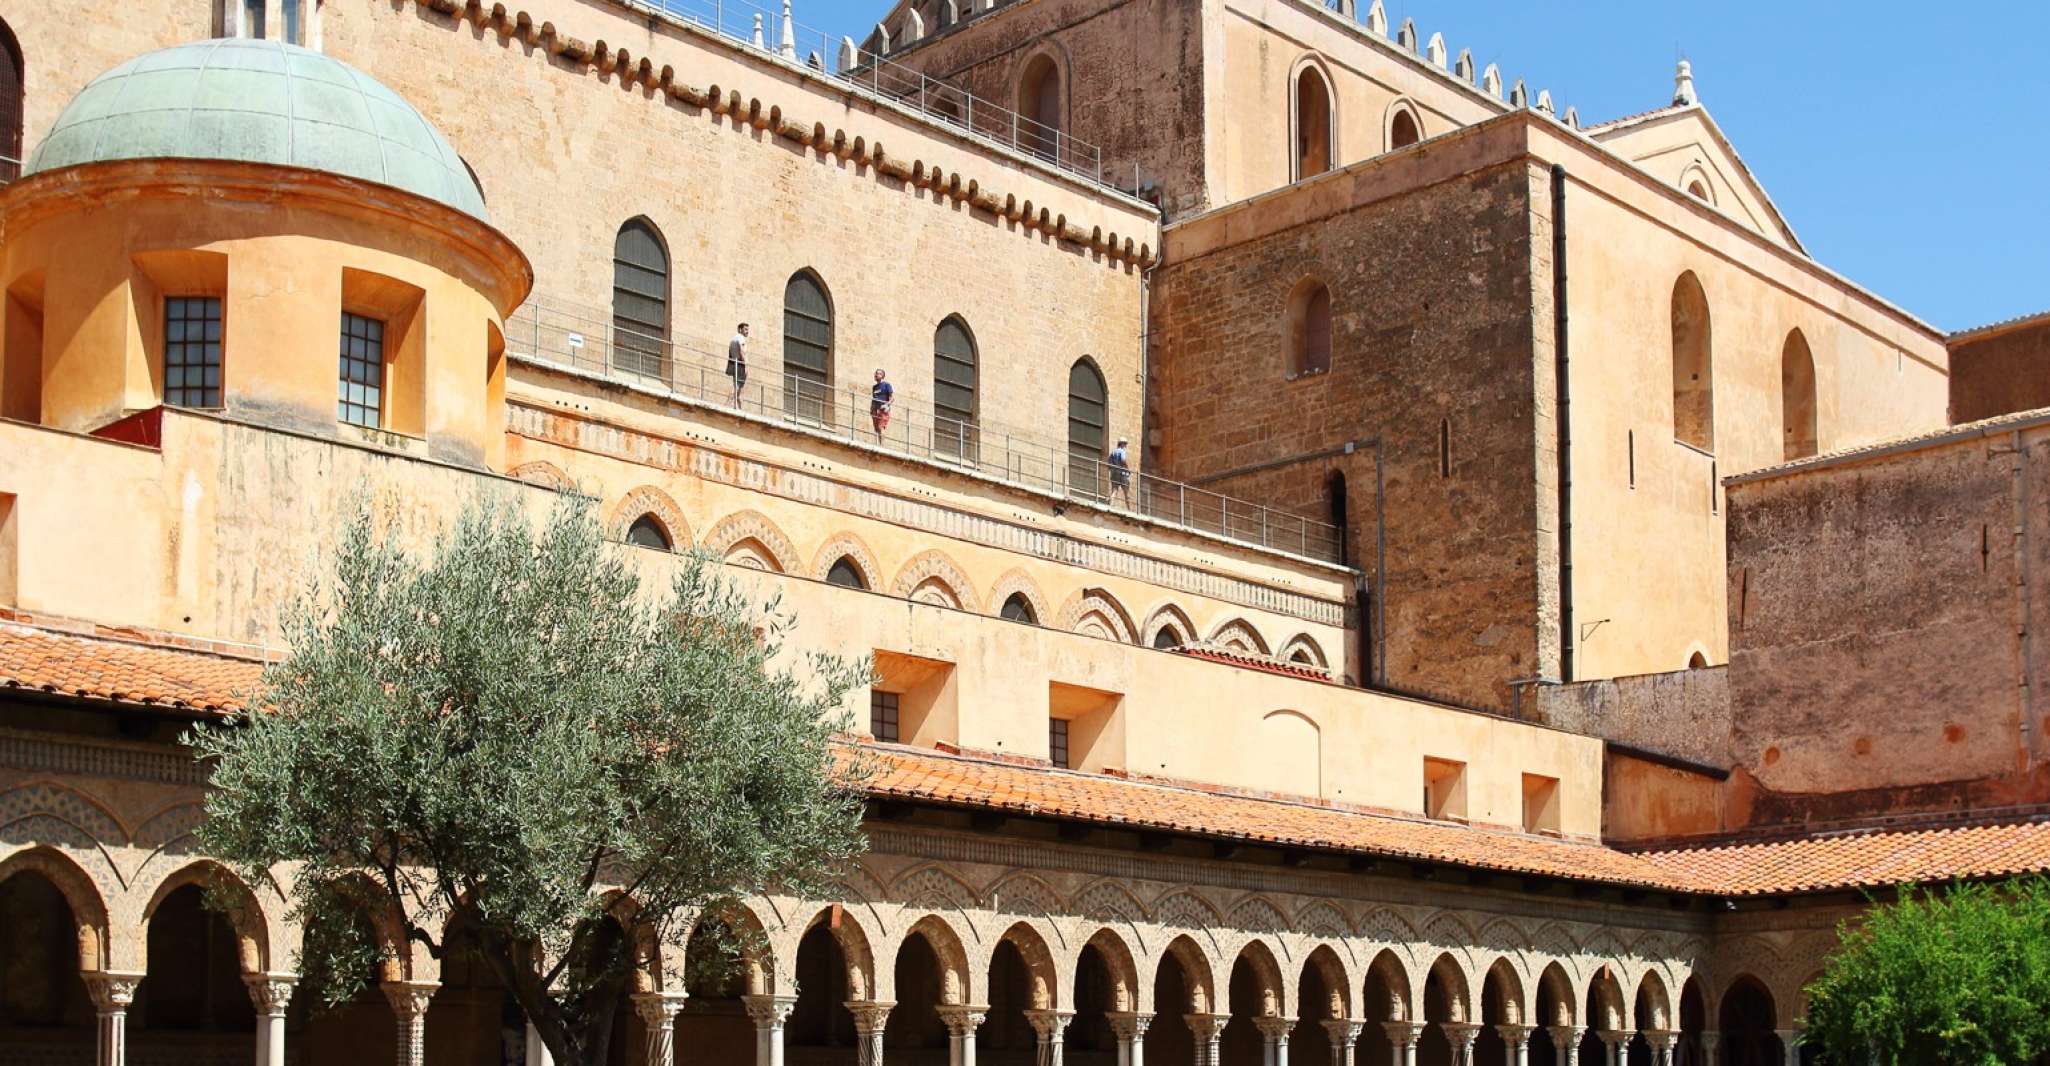 From Palermo, Monreale and Cefalù Half-Day Trip - Housity